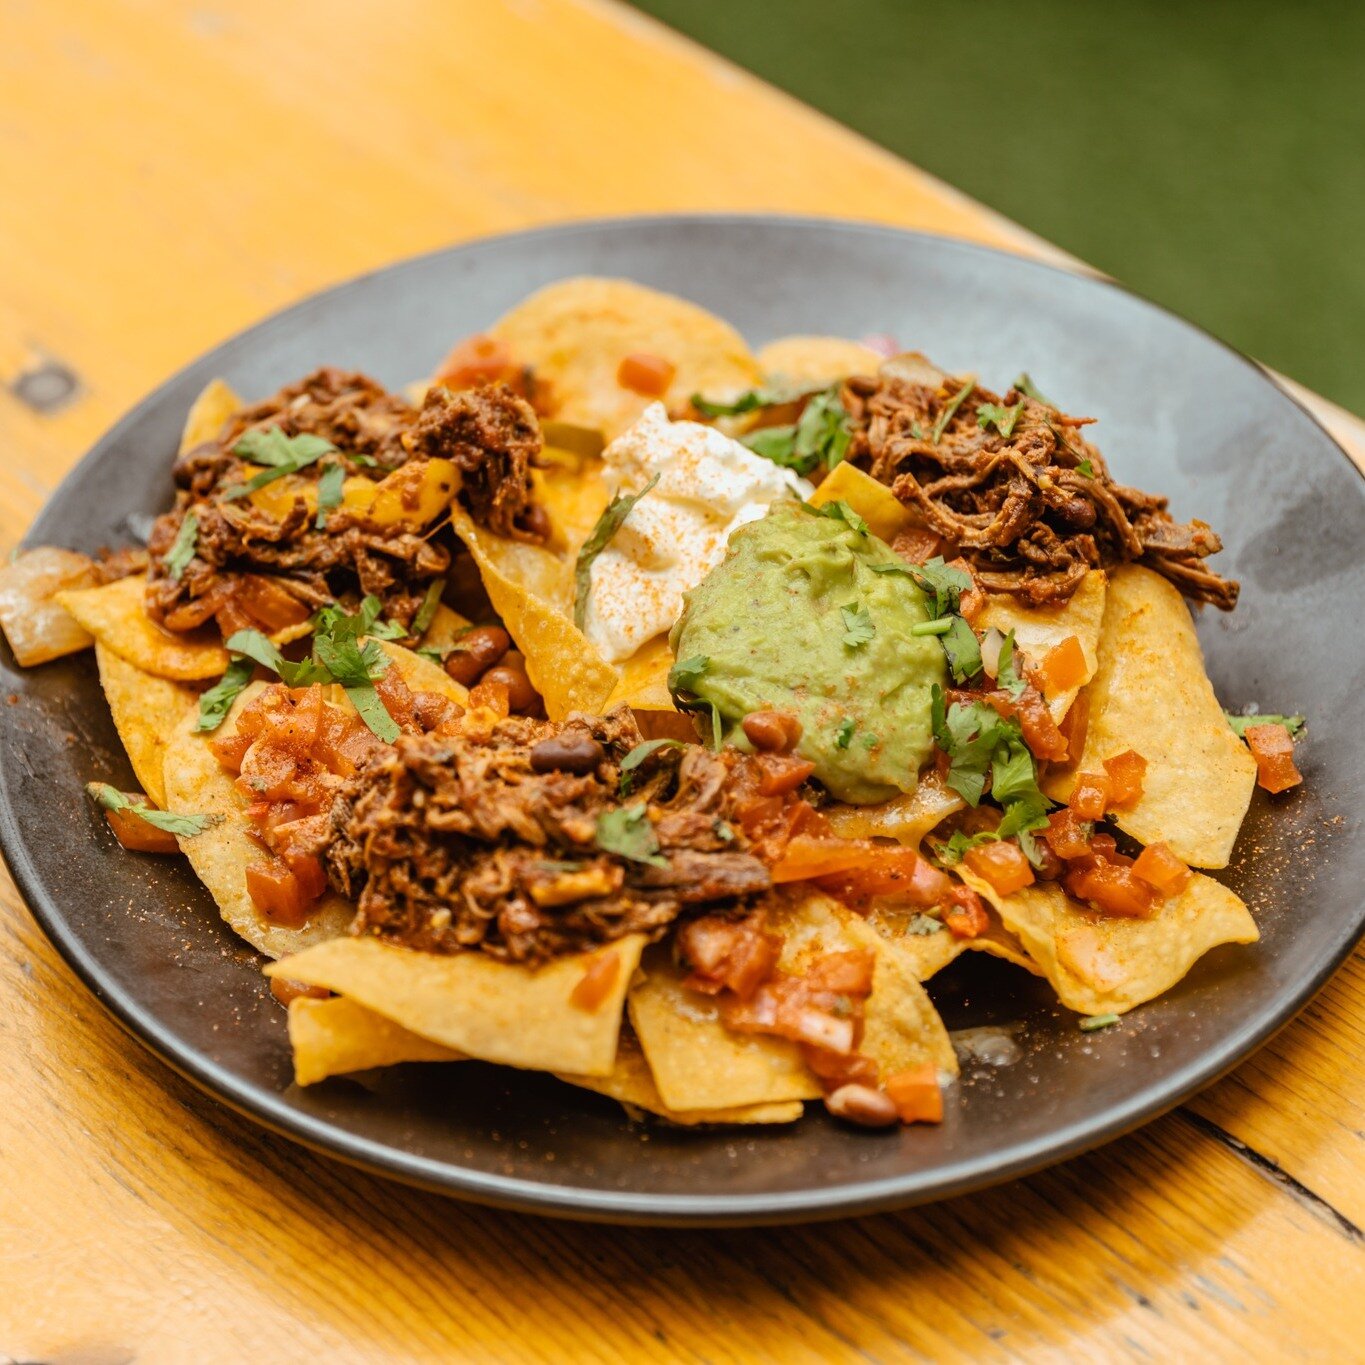 Betty's BEEF NACHOS is here to keep you company if the weather is getting you down 😊 There's always tropical vibes to spare at Baha 🌴

Just pop in when you feel like a feed, and for group bookings give us a call on 09 520 0002 or email info@bahabet